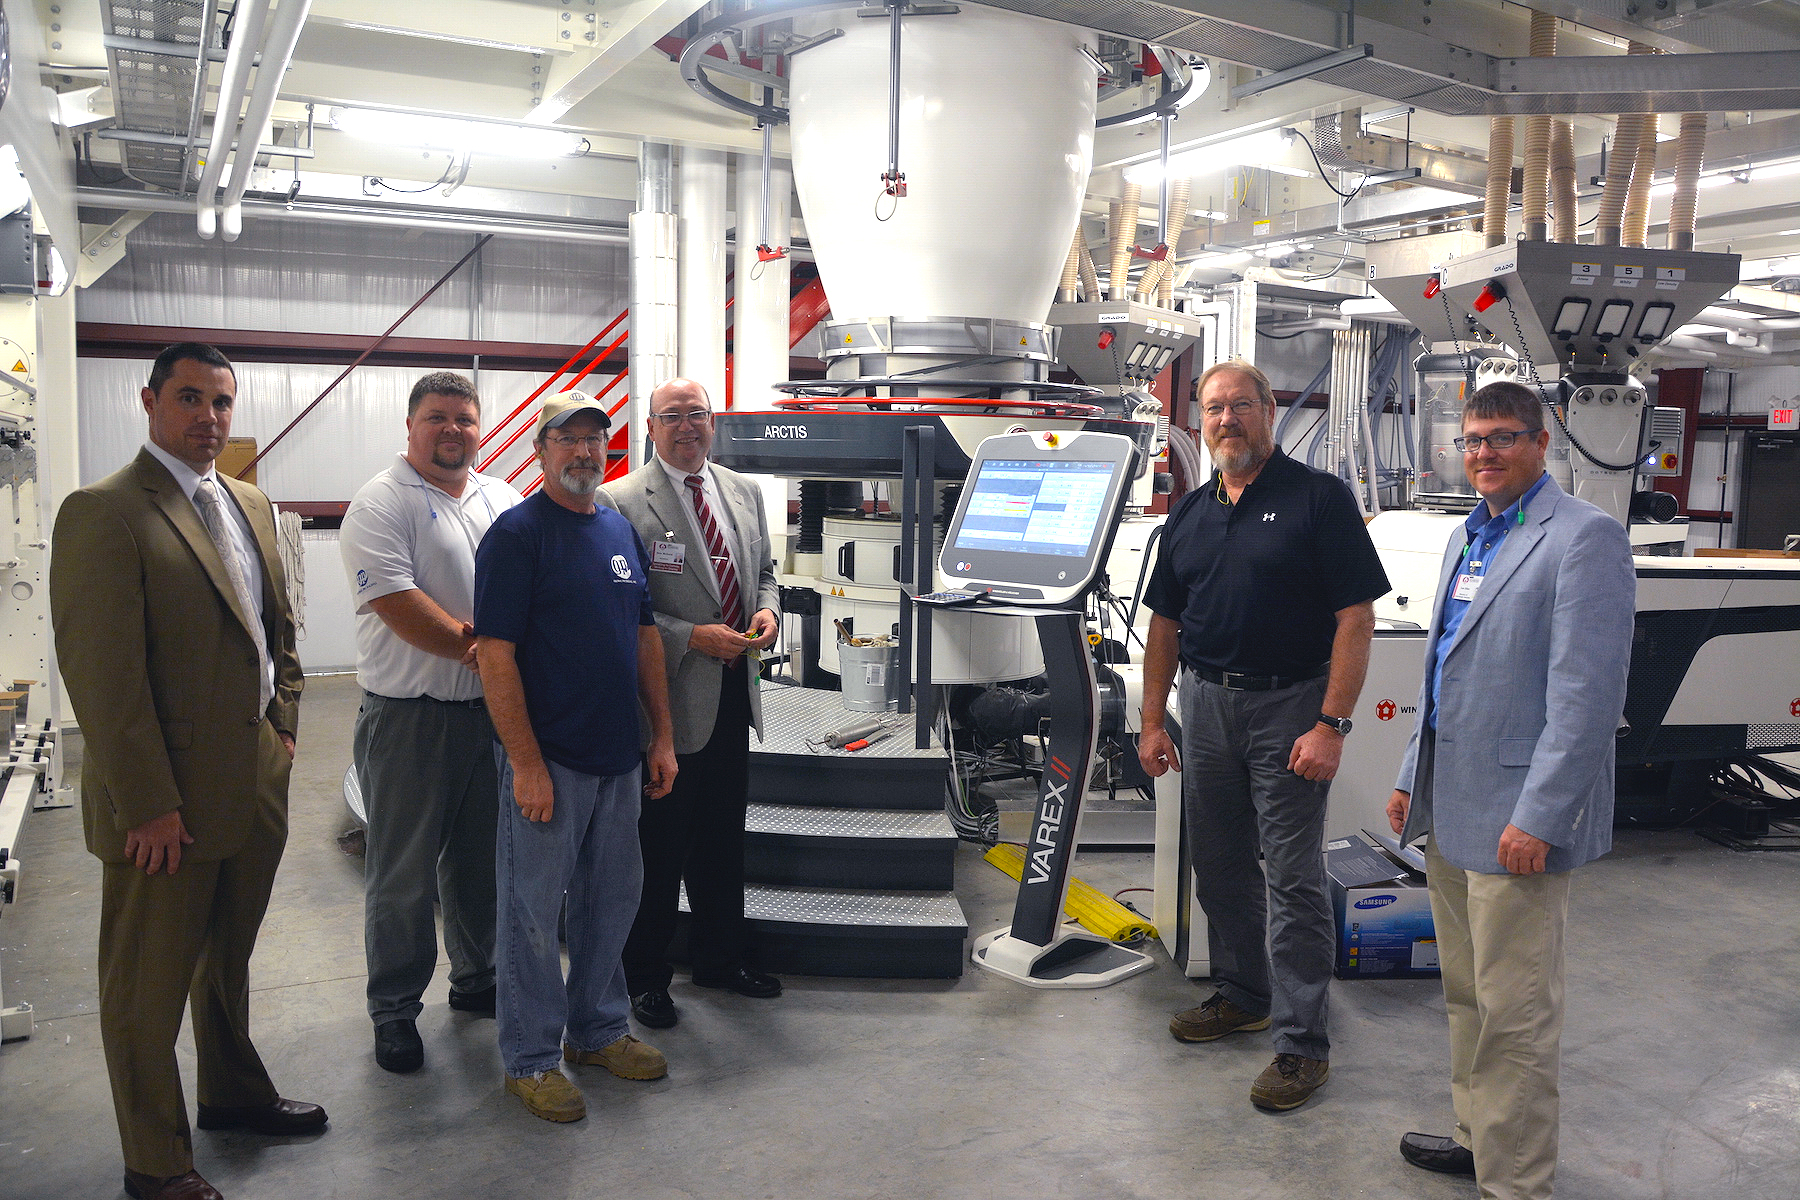 Richmond Community College recently partnered with Global Packaging to provide customized training for the company’s workforce. Pictured above, representatives from RichmondCC and Global Packaging stand with a piece of new equipment Global employees will be trained to use. Pictured, from left, are RichmondCC Director of Workforce and Economic Development Robbie Taylor, Global Packaging General Manager Kevin Stephens, Global Packaging Extruder Operator Ted Deese, RichmondCC President Dr. Dale McInnis, Global Packaging Plant Manager Paul Kinsey and RichmondCC Director of Customized Training Lee Eller.